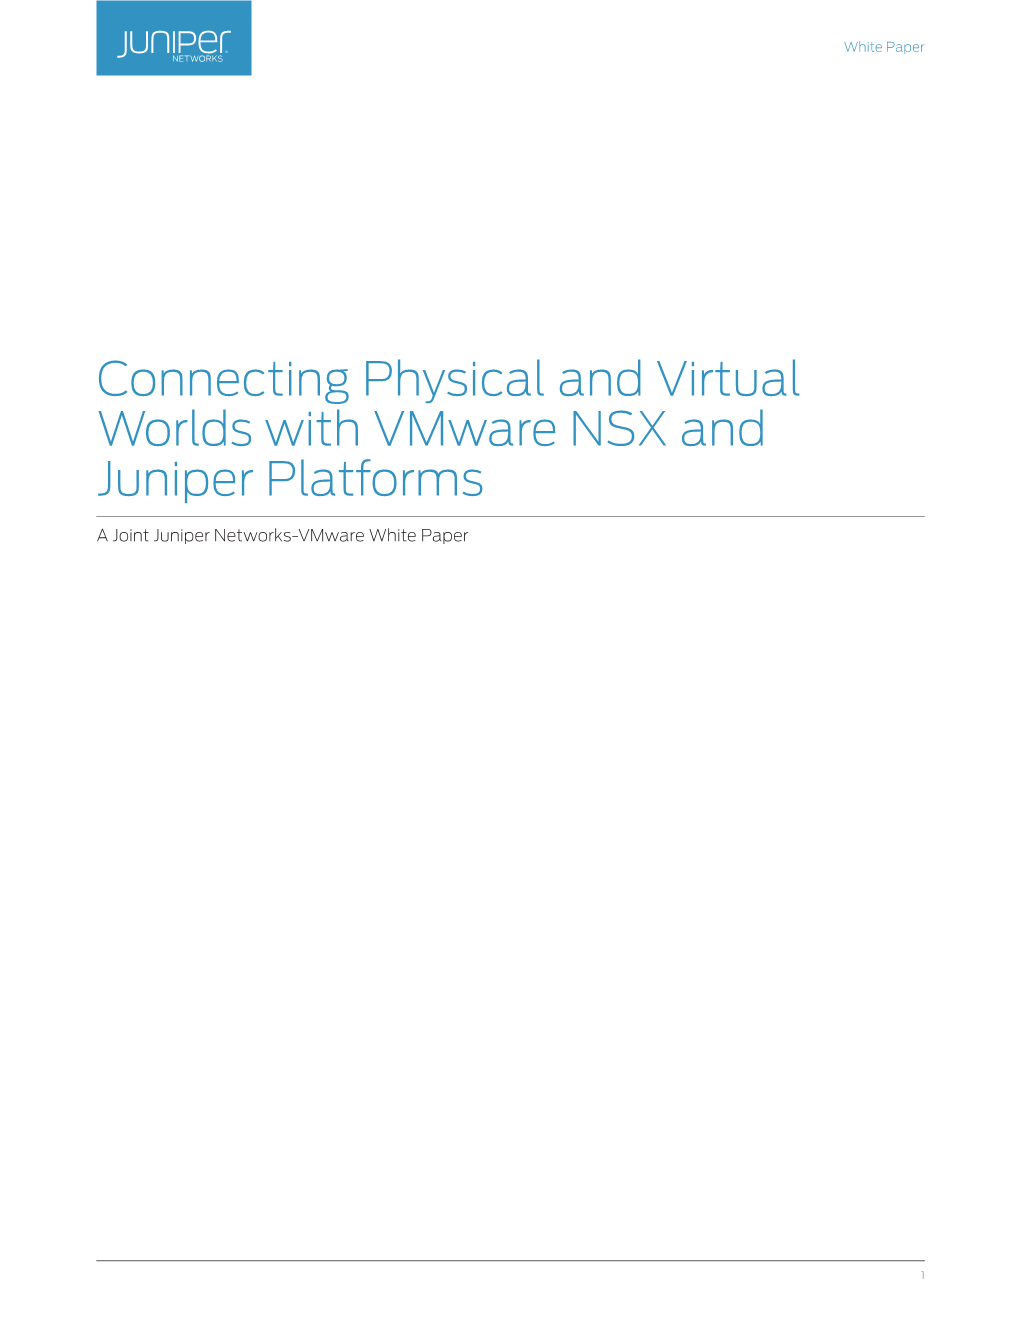 Connecting Physical and Virtual Worlds with Vmware NSX and Juniper Platforms